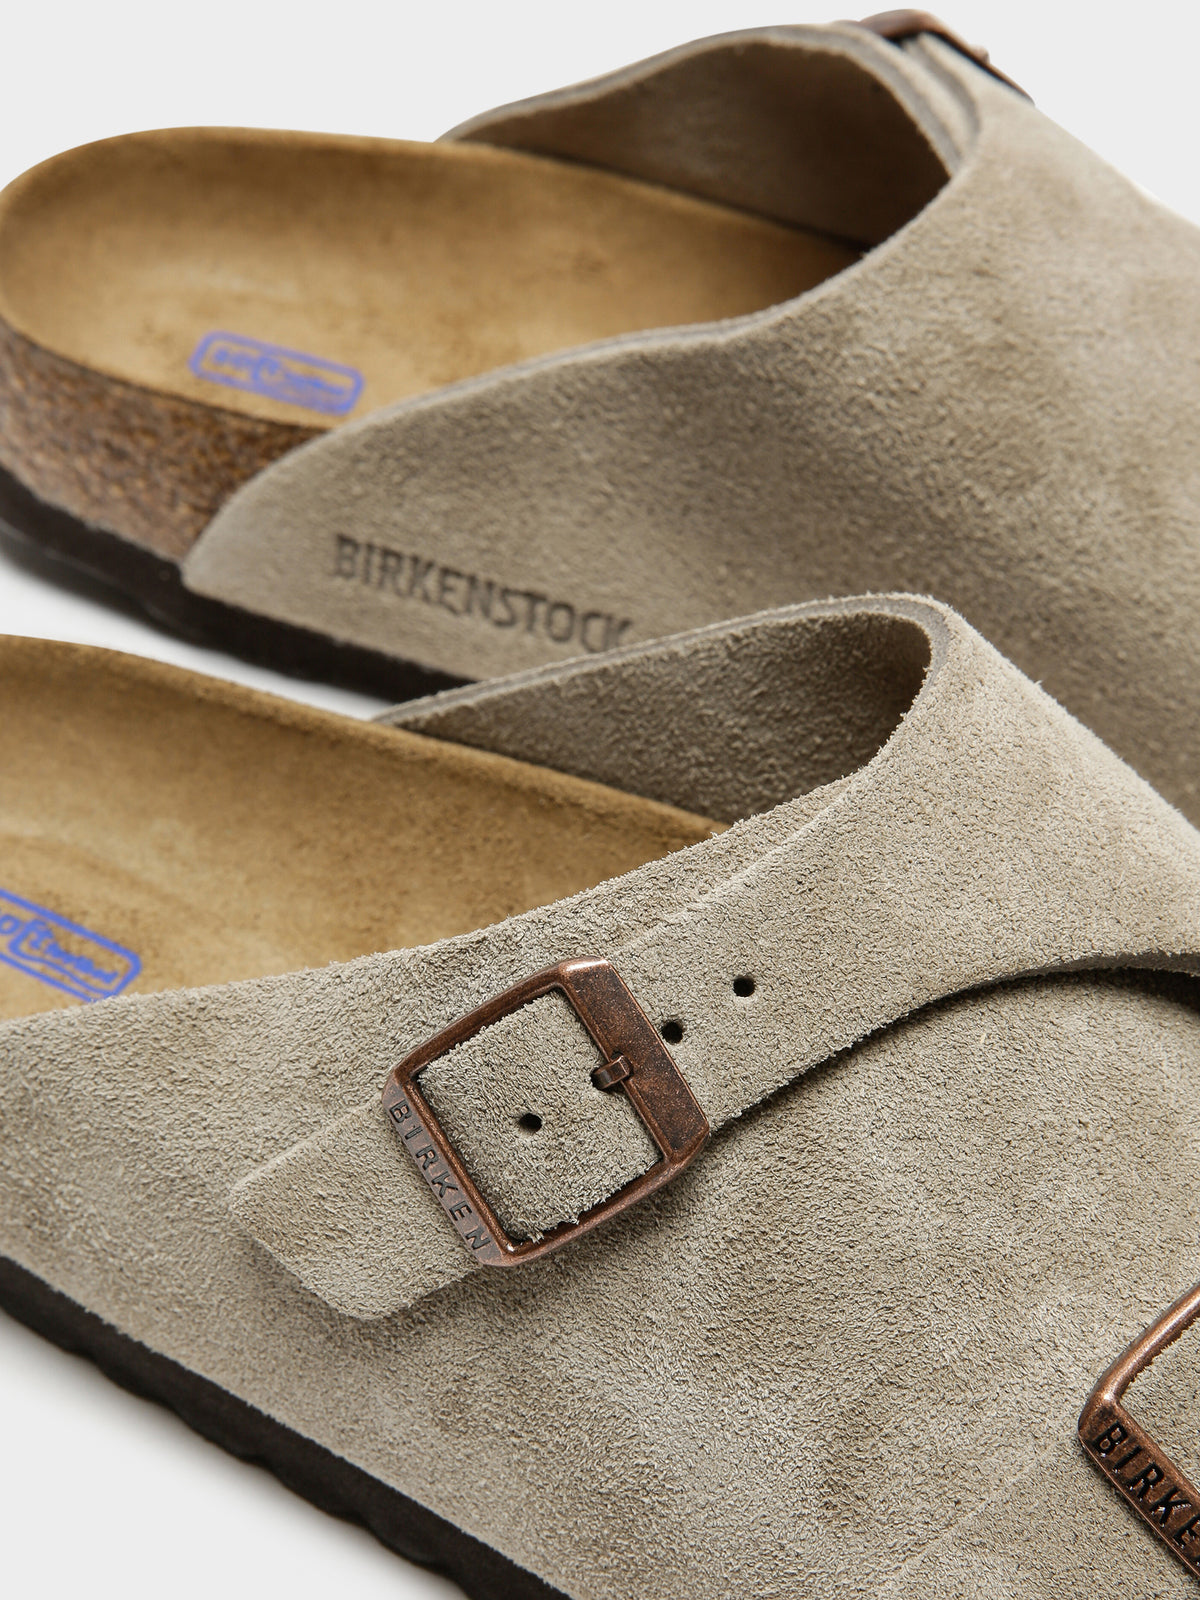 Unisex Zurich Suede Soft Footbed Narrow in Taupe